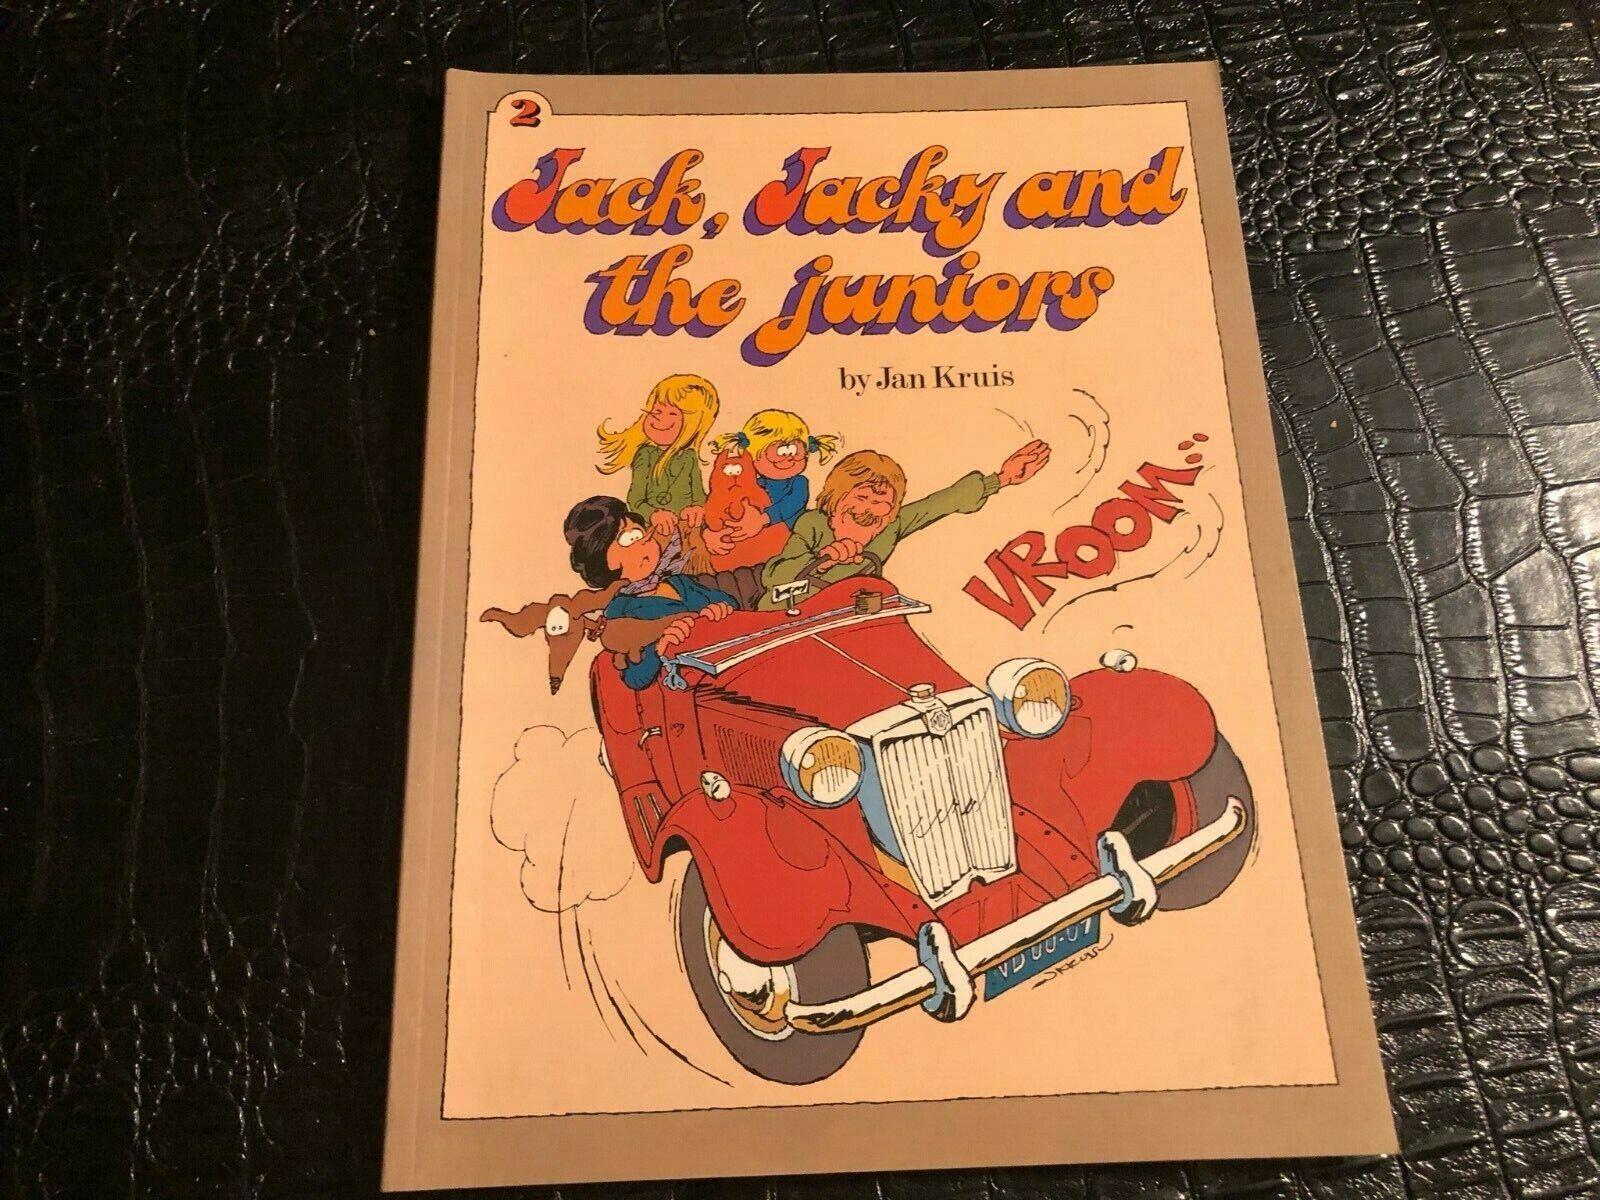 JACK JACKY and JUNIORS softcover book by JAN KRUIS  (UNREAD)